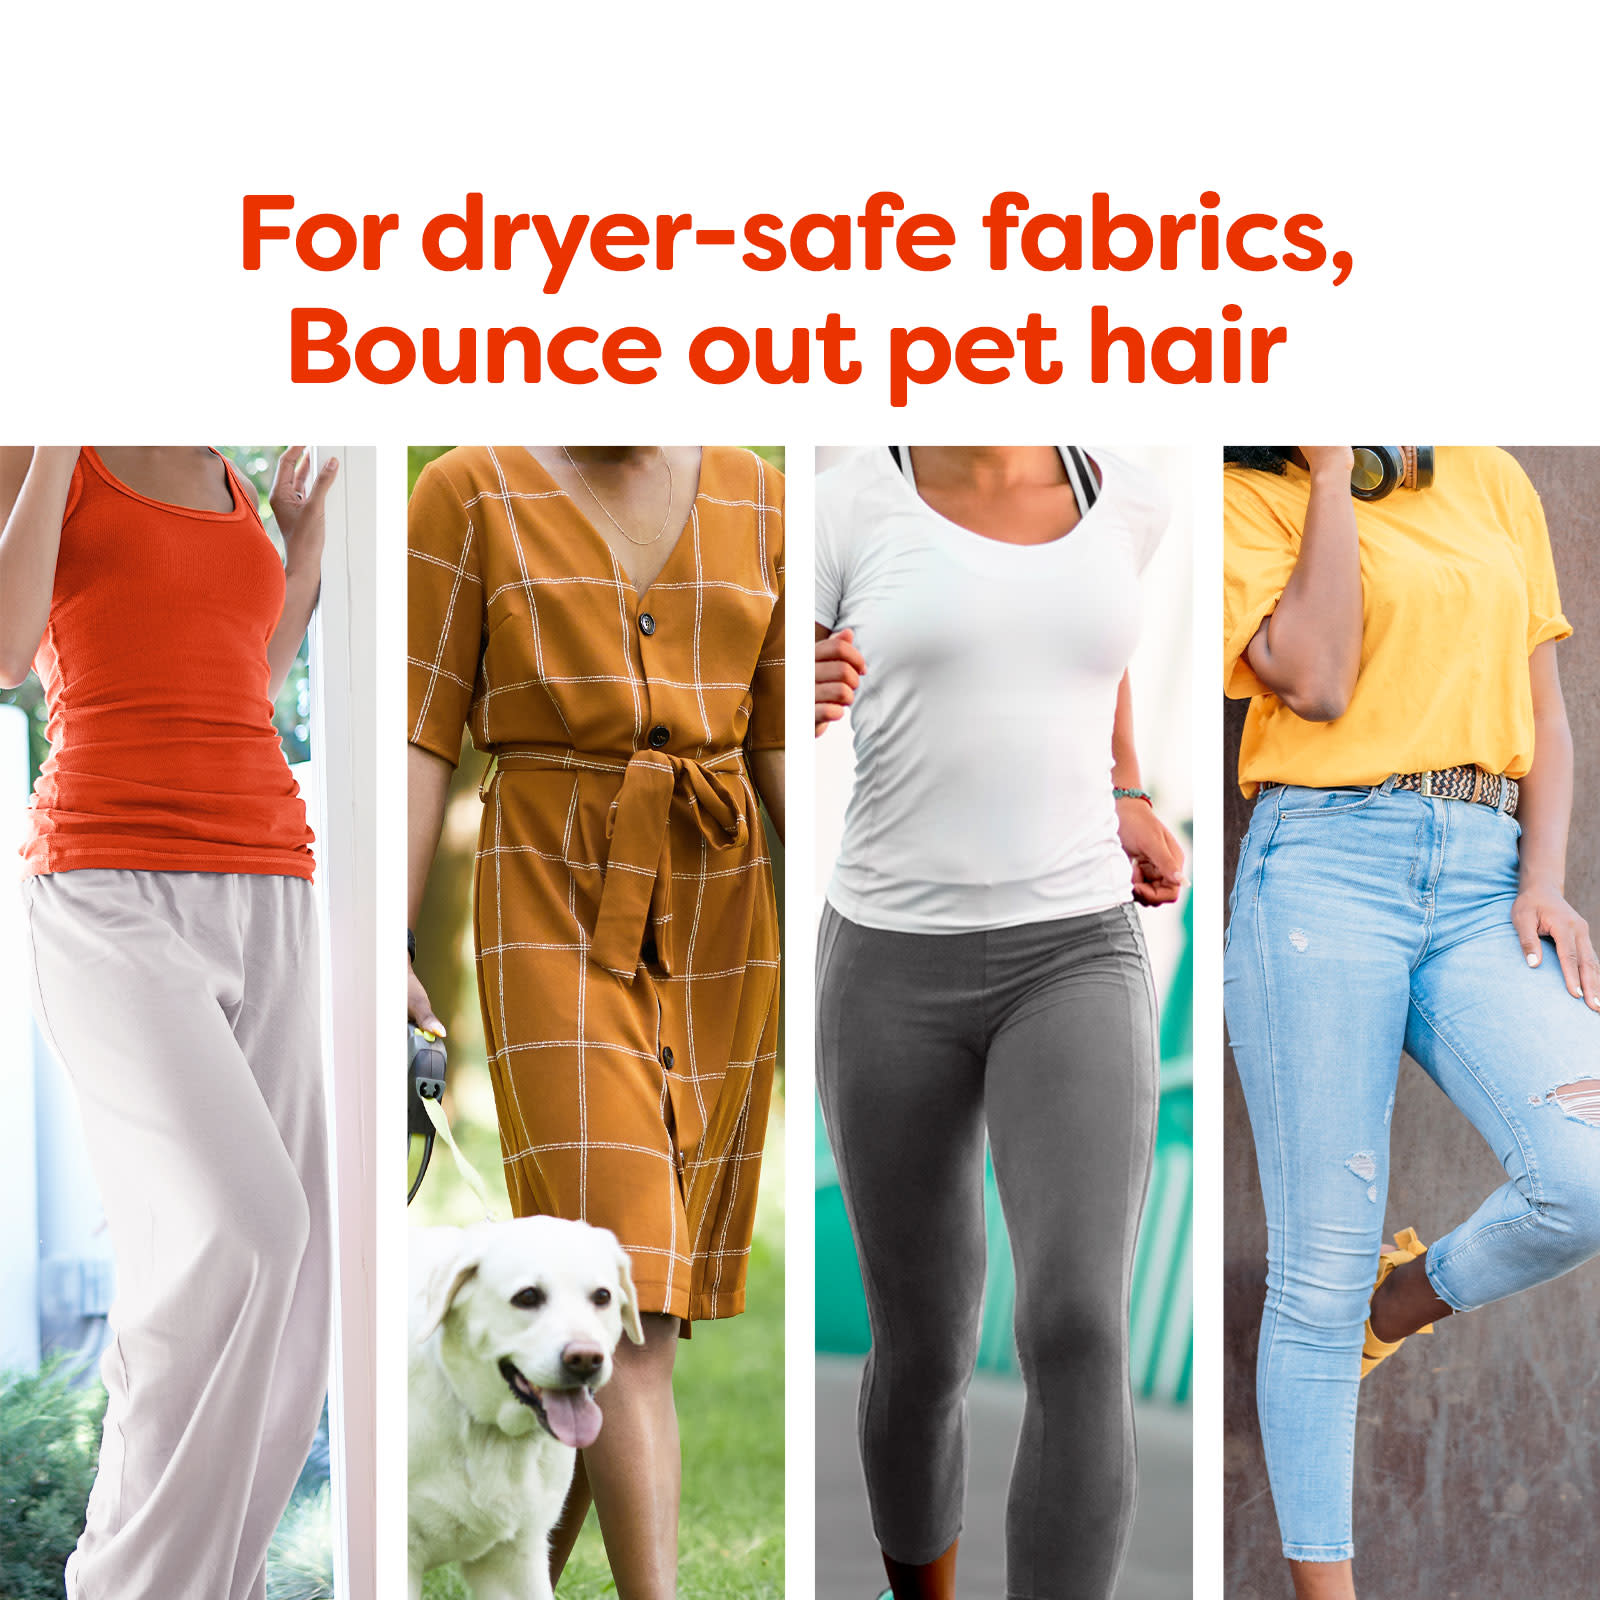 Bounce Pet Hair Unscented Dryer Sheets: For dryer-safe fabrics, Bounce out pet hair